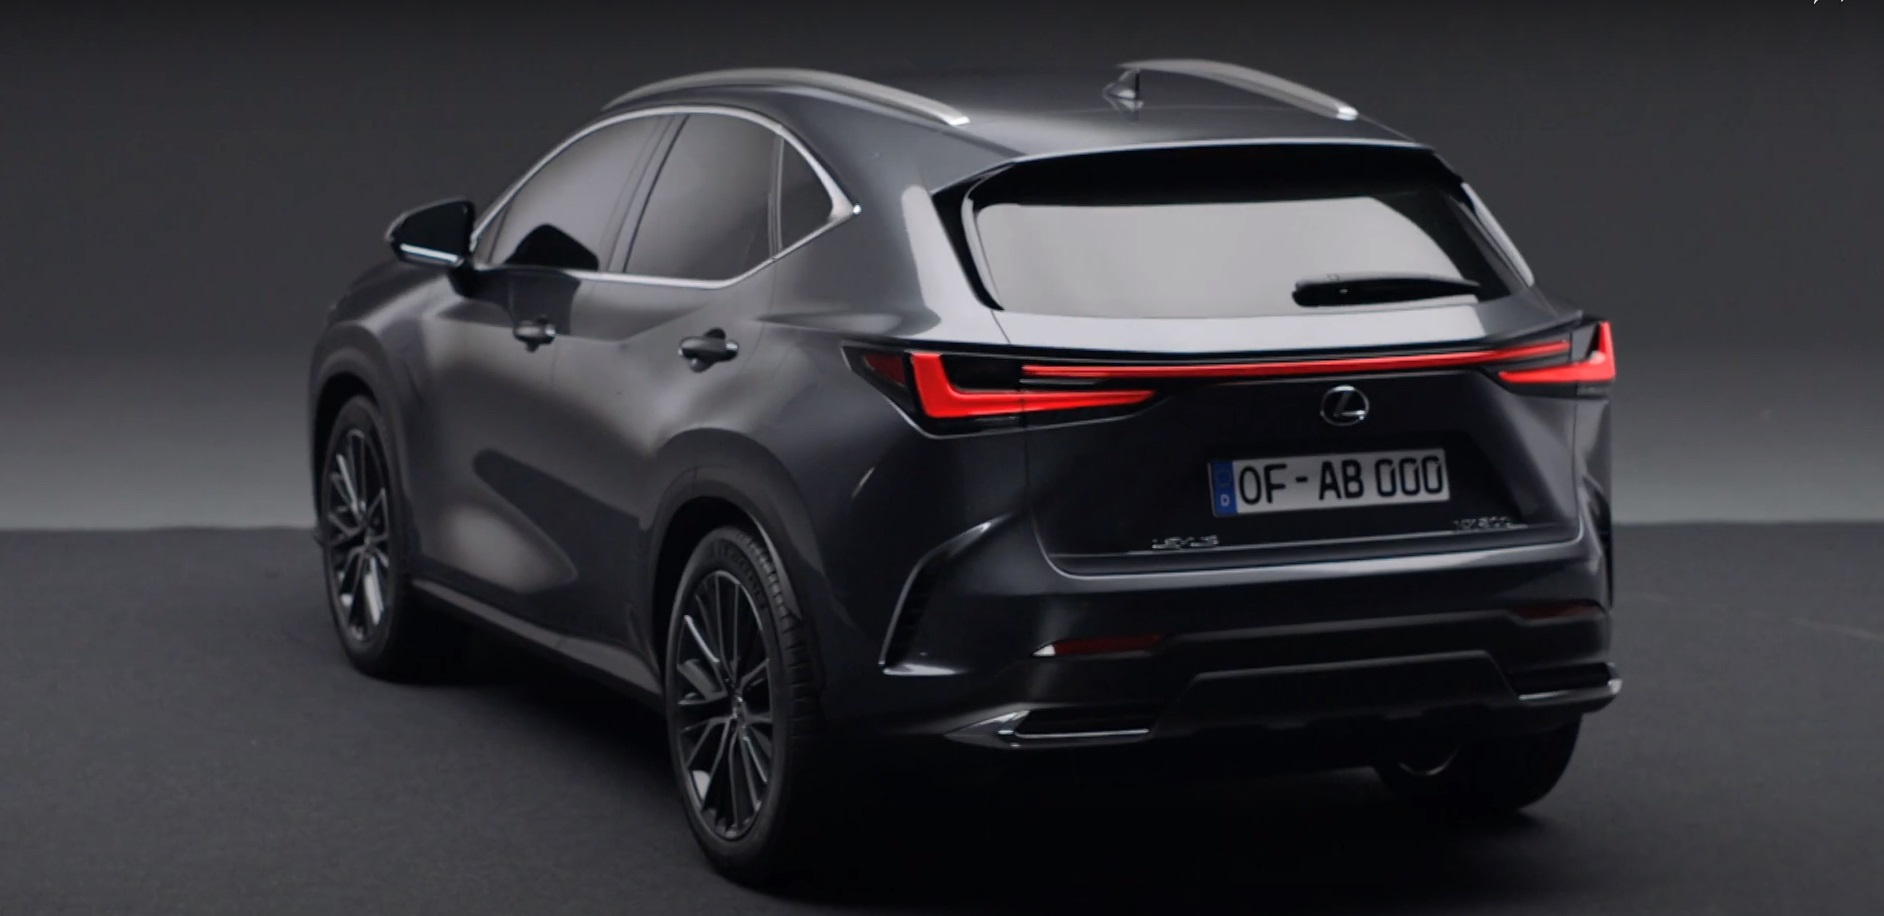 2022 Lexus NX: First Image Of All New Compact Premium SUV Surface Online